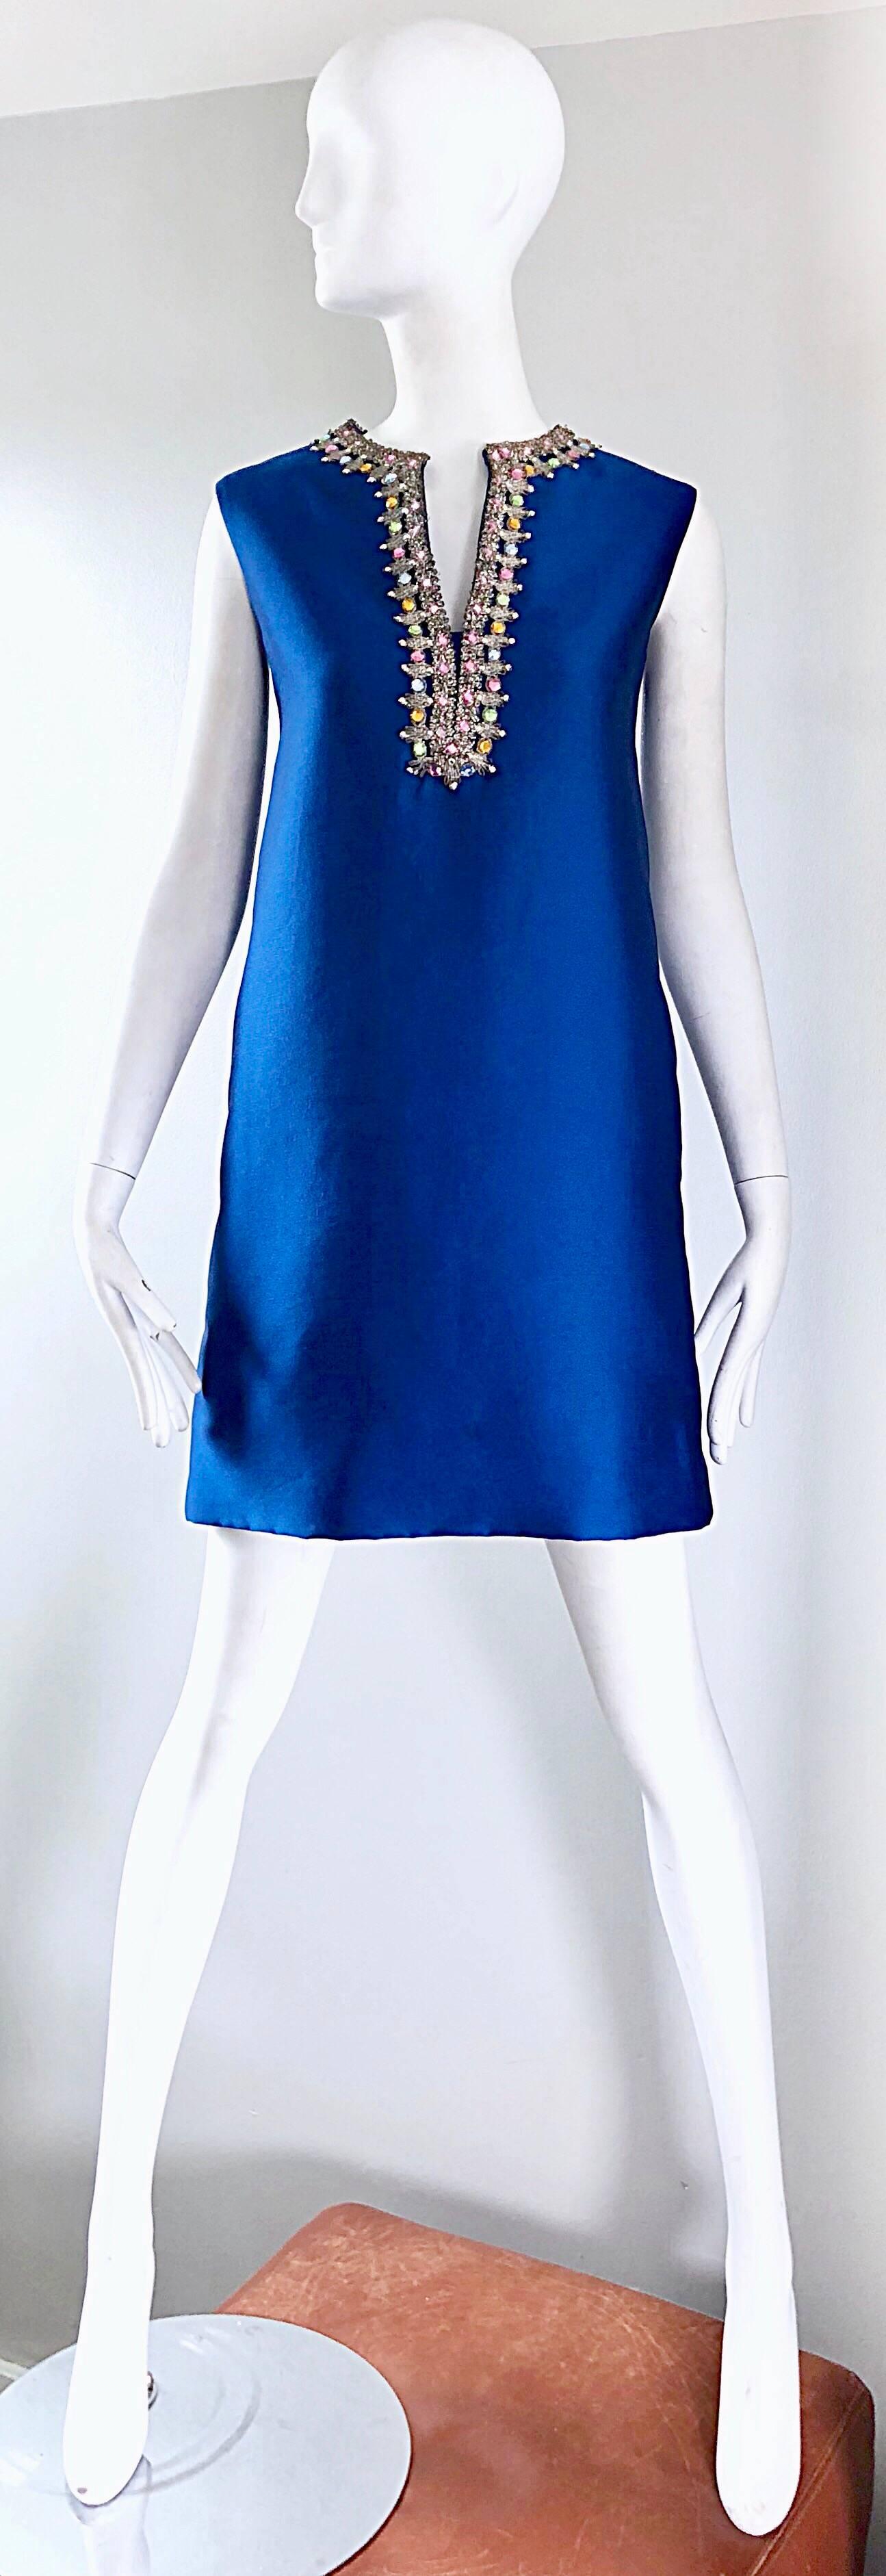 Absolutely beautiful 1960s KIKI HART for SAKS FIFTH AVENUE royal blue silk shantung shift dress! Couture quality, with so much attention to detail. Vibrant blue color, with colorful crystal rhinestone encrusted along the neck. POCKETS at each side